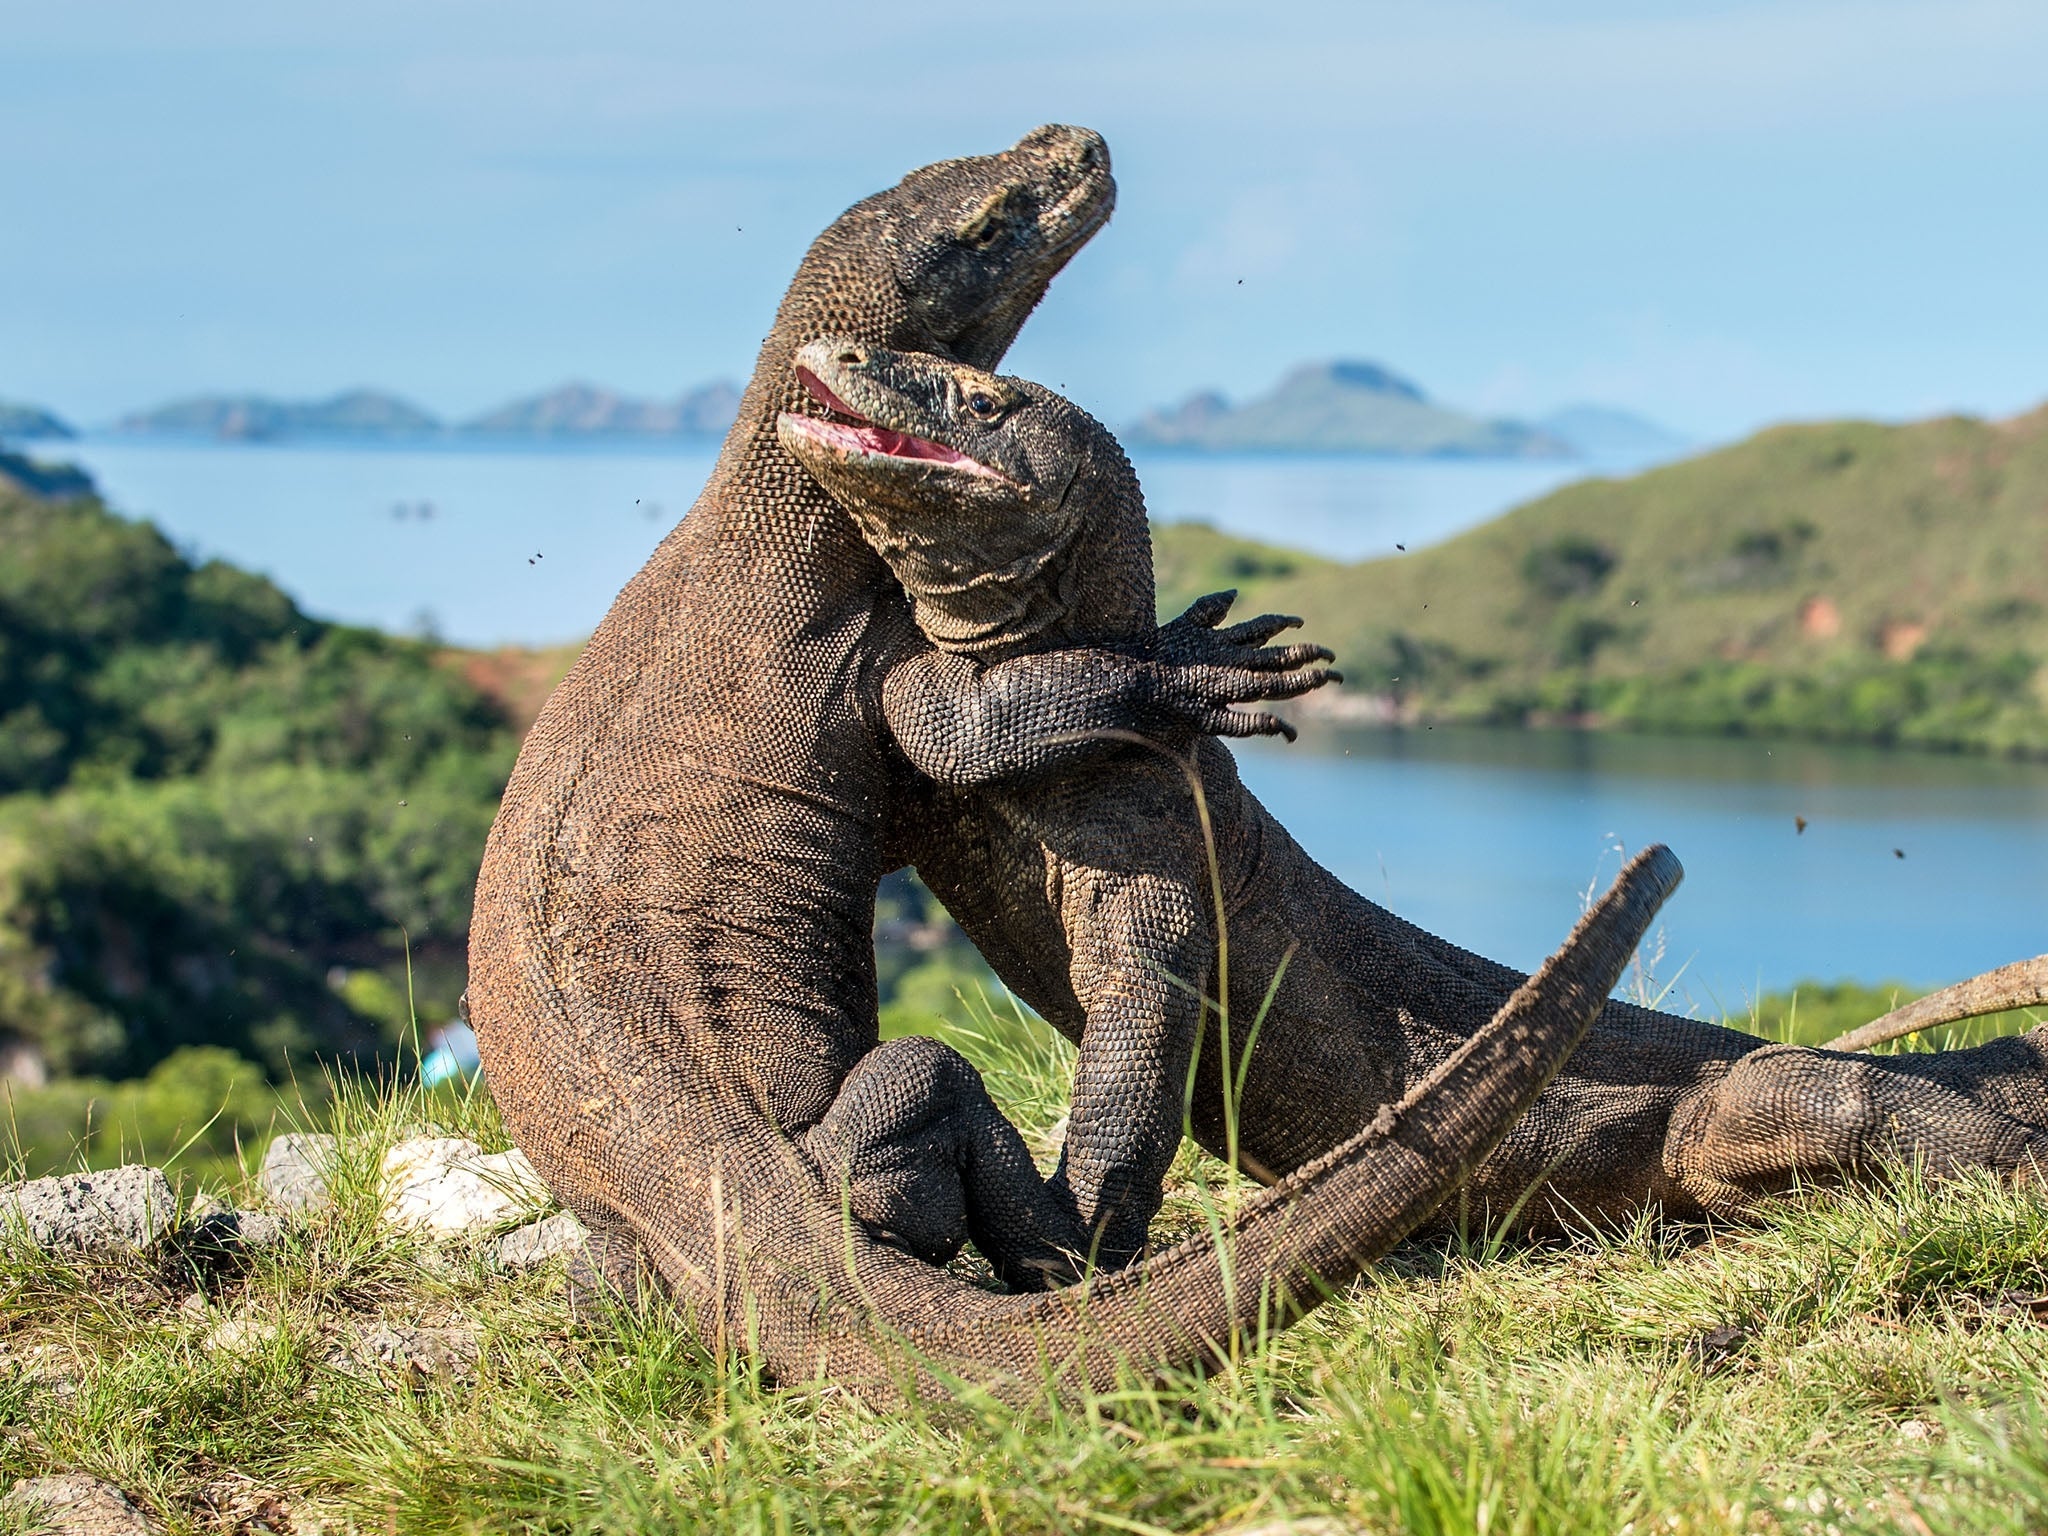 Komodo dragons are the biggest living lizard in the world